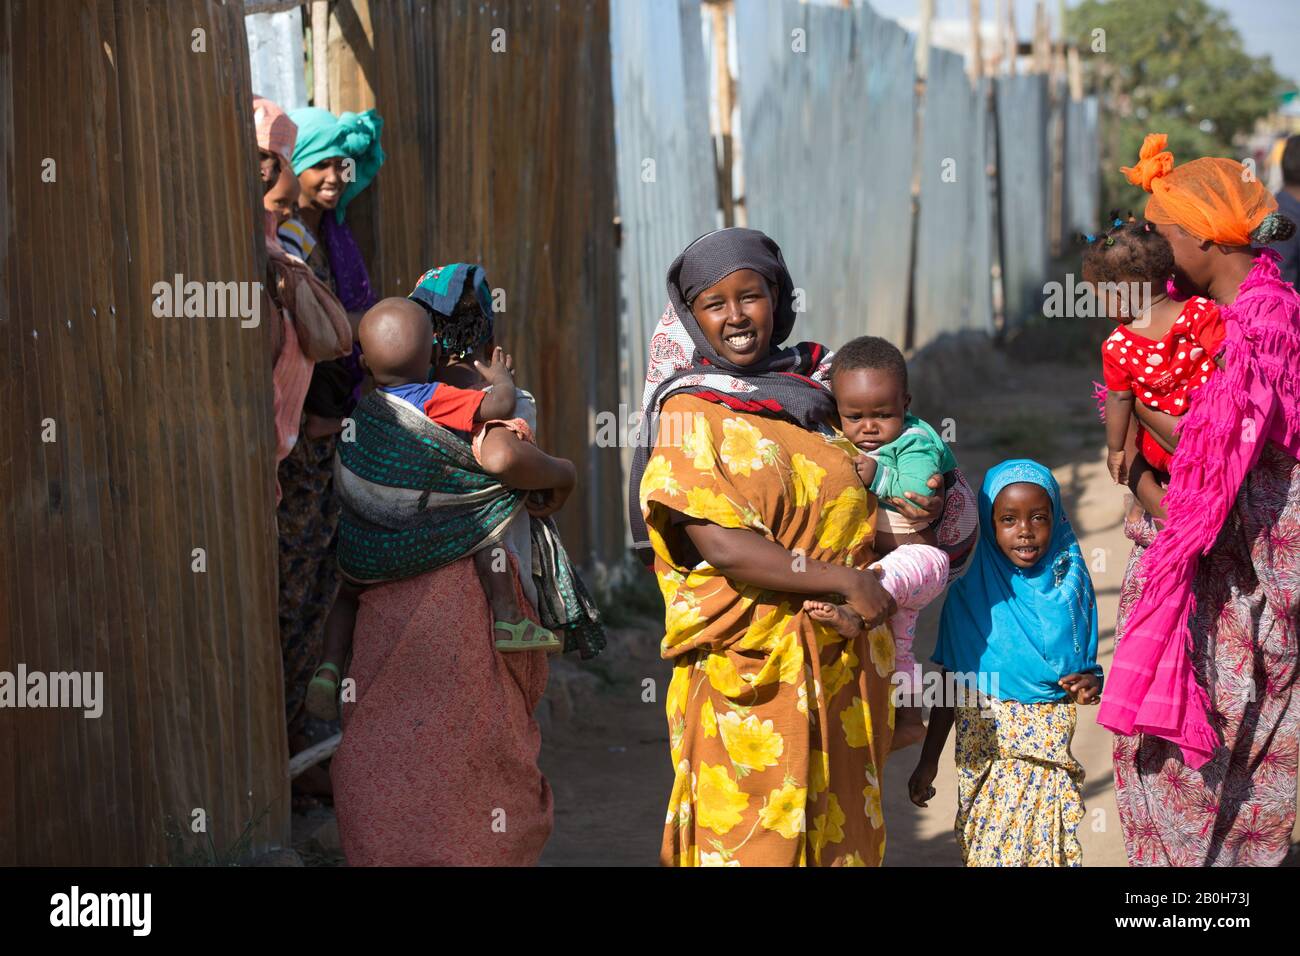 02.11.2019, Adama, Oromiyaa, Ethiopia - 8000 IDPs from the Somalia region live and reside in four refugee camps on the outskirts of the city. Women wi Stock Photo